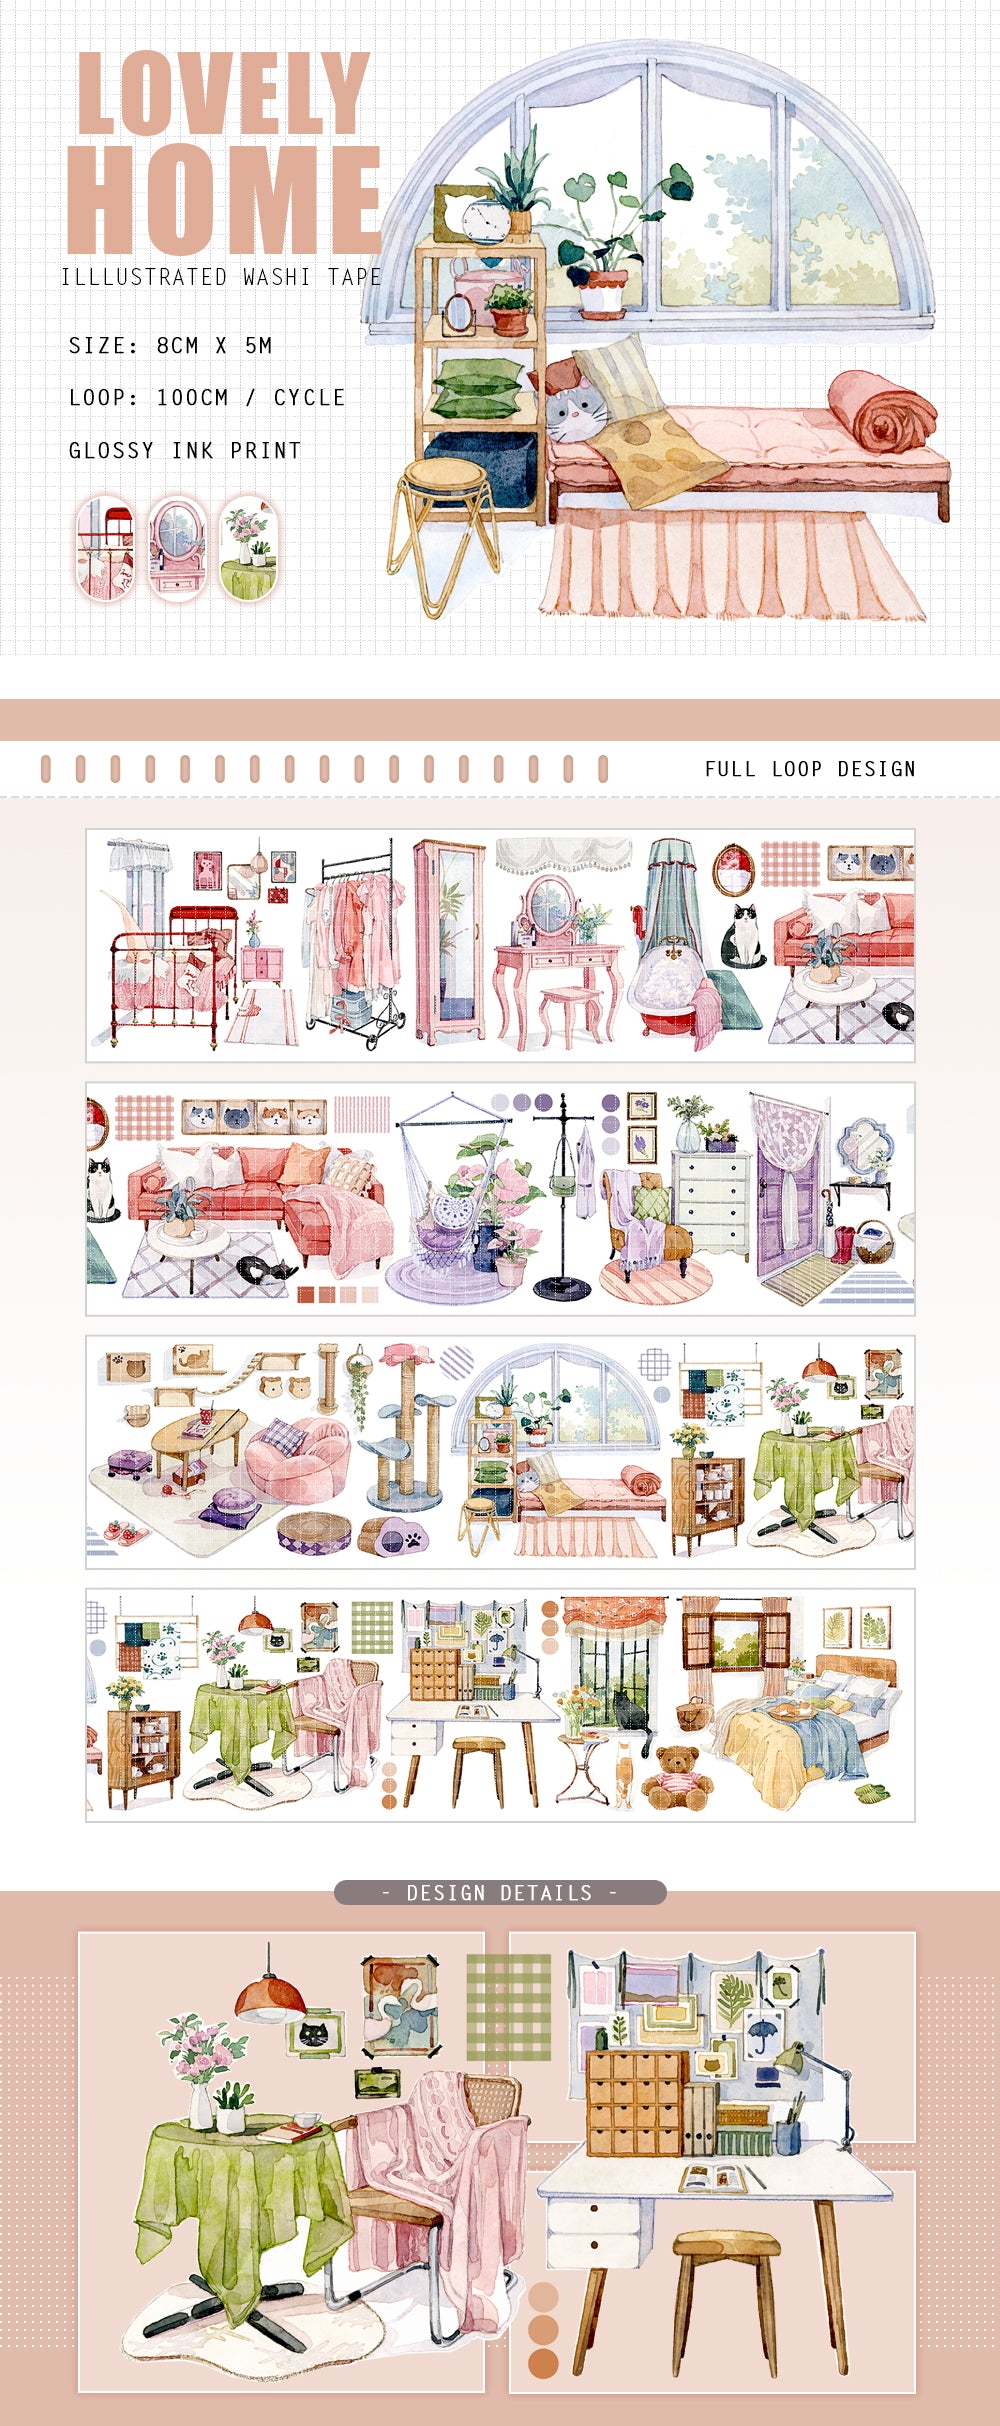 Lovely Home Washi Tape